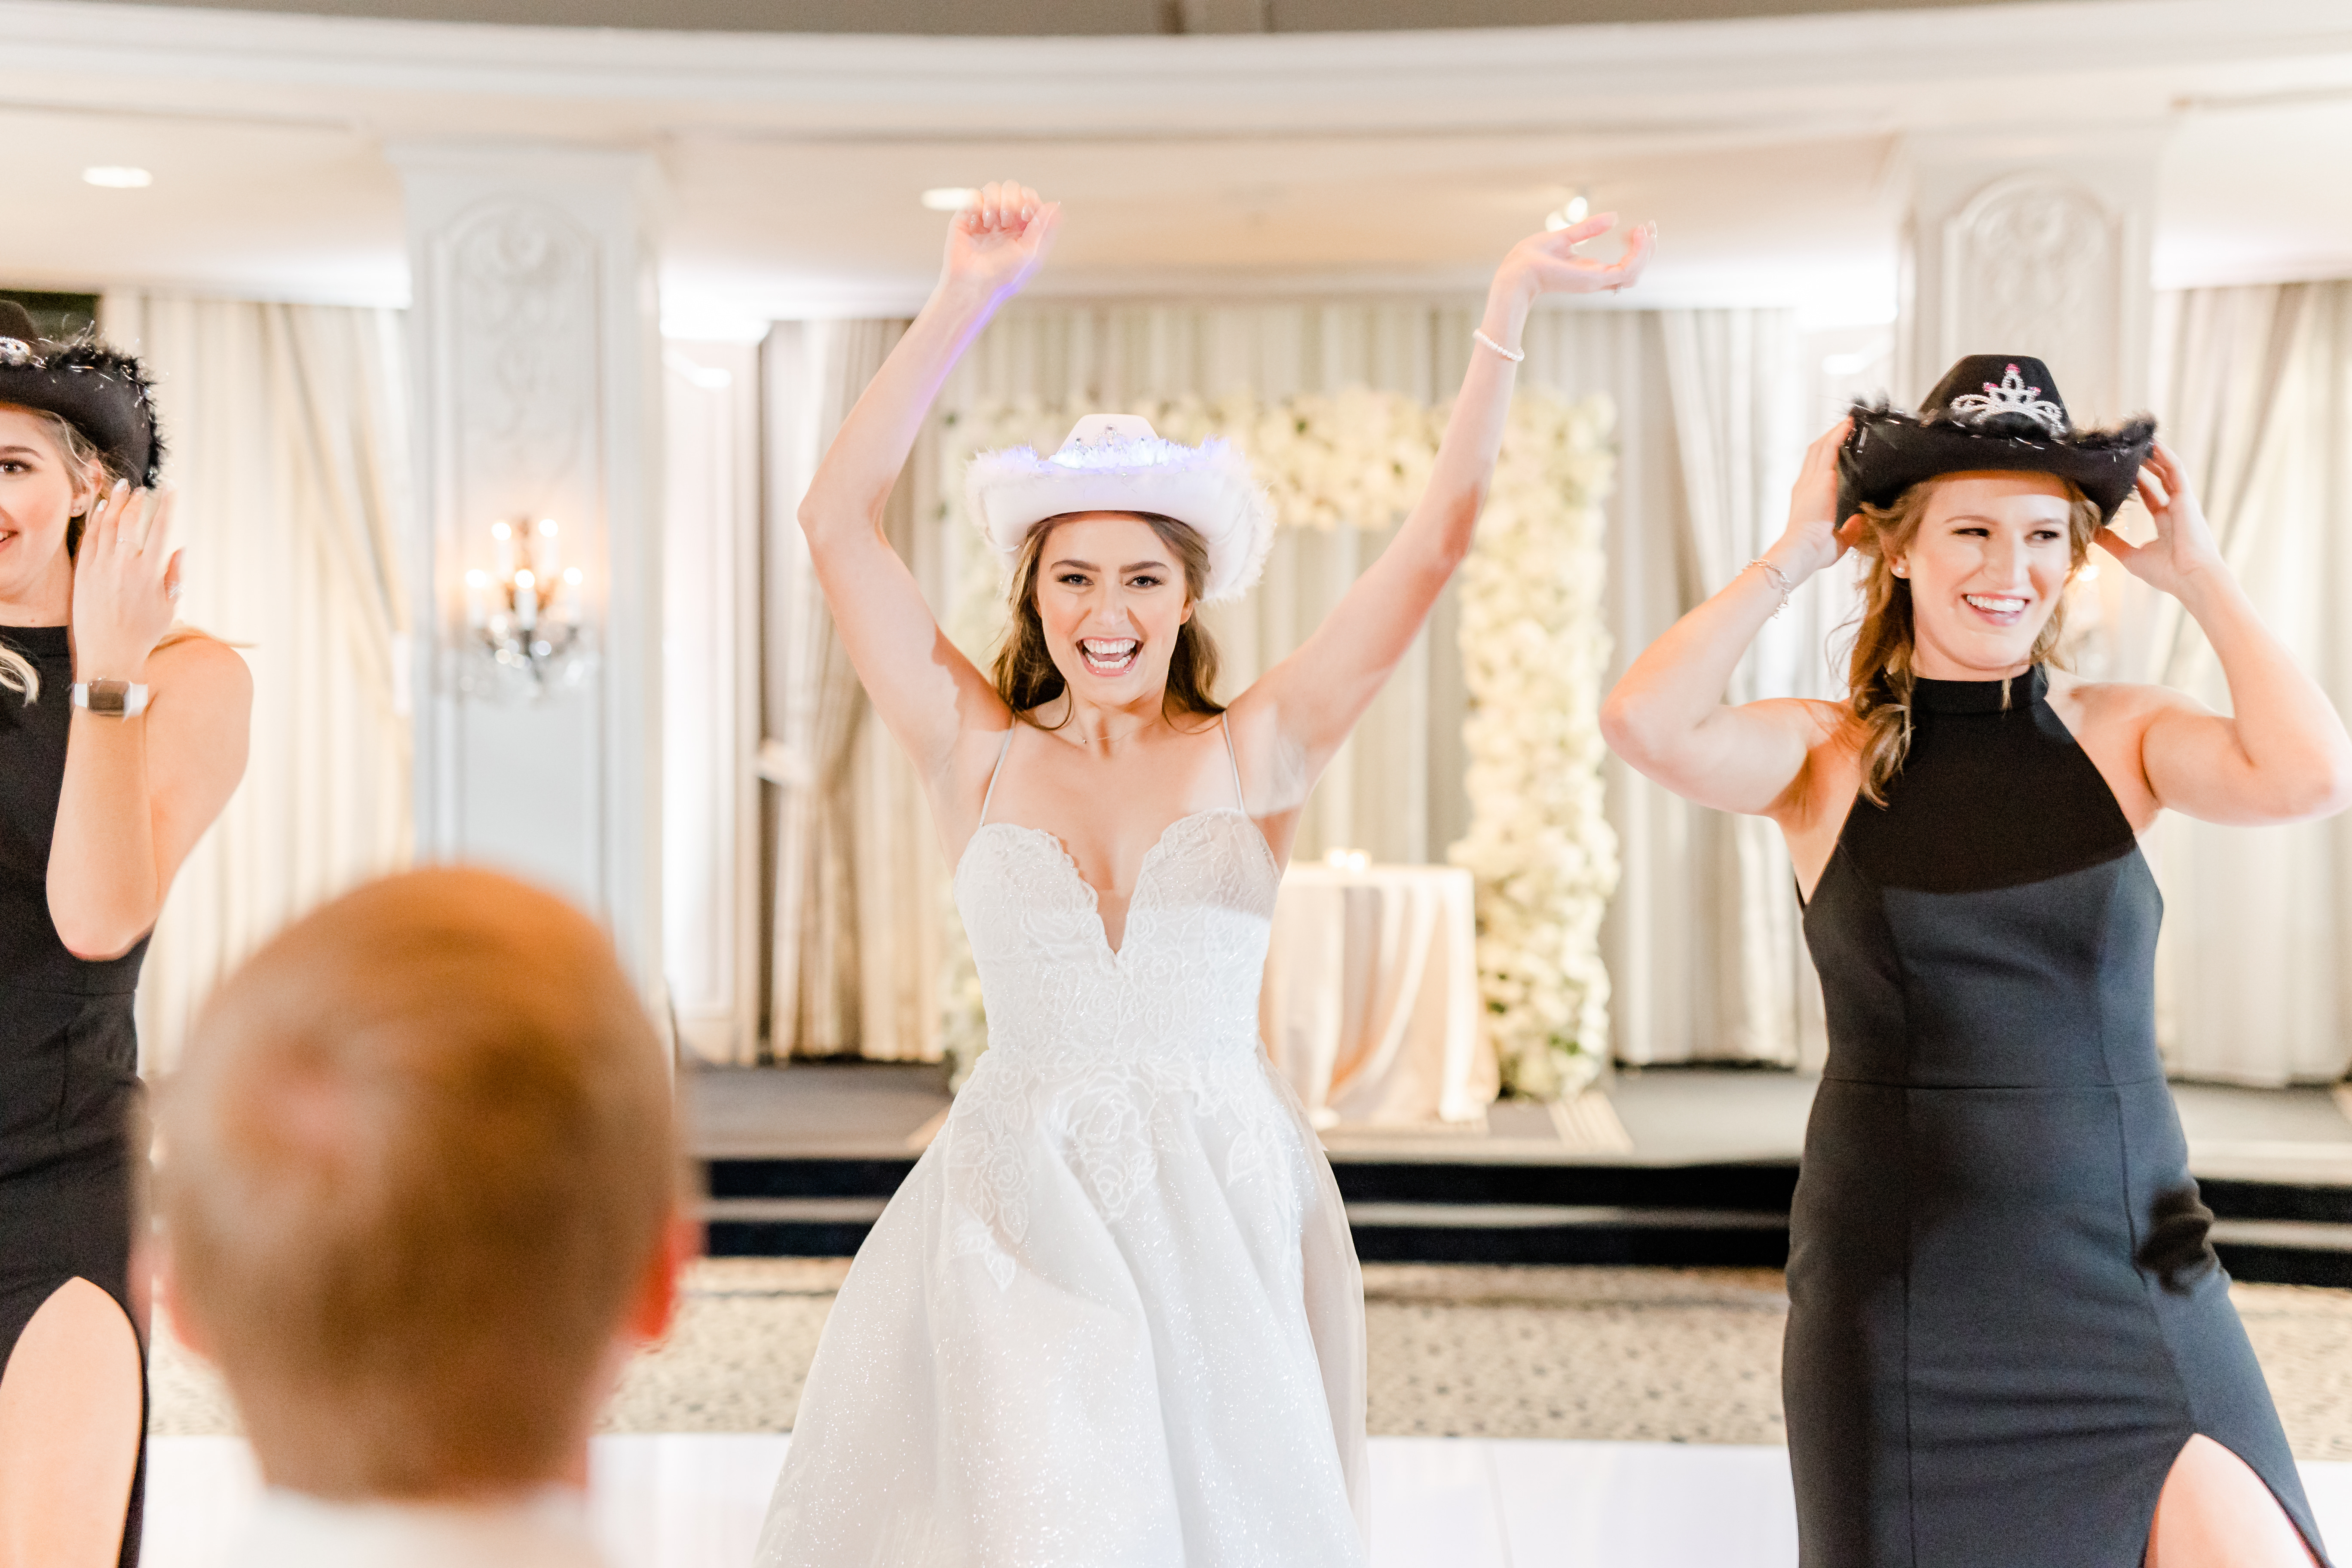 The bride smiles and has her hands in the air as she dances with her bridesmaids at her wedding reception in the Houston museum district.